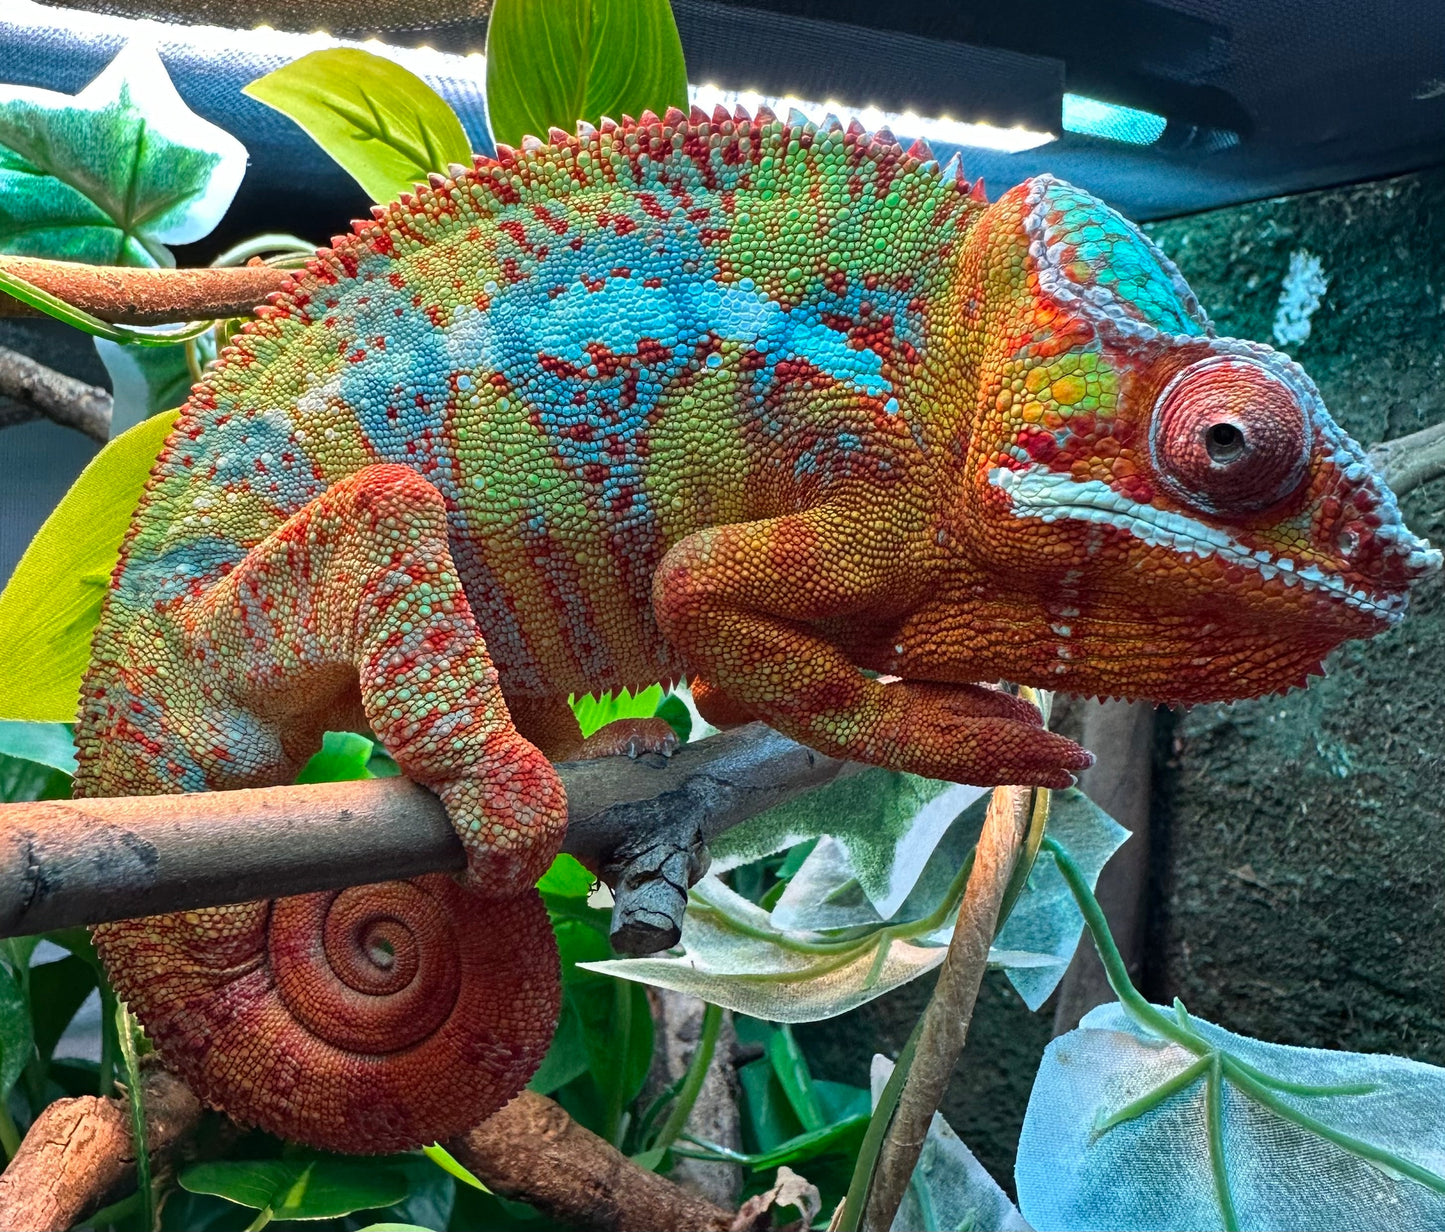 Male Baby Chameleon of Ranboo and Dumpling including All-In-One habitat kit